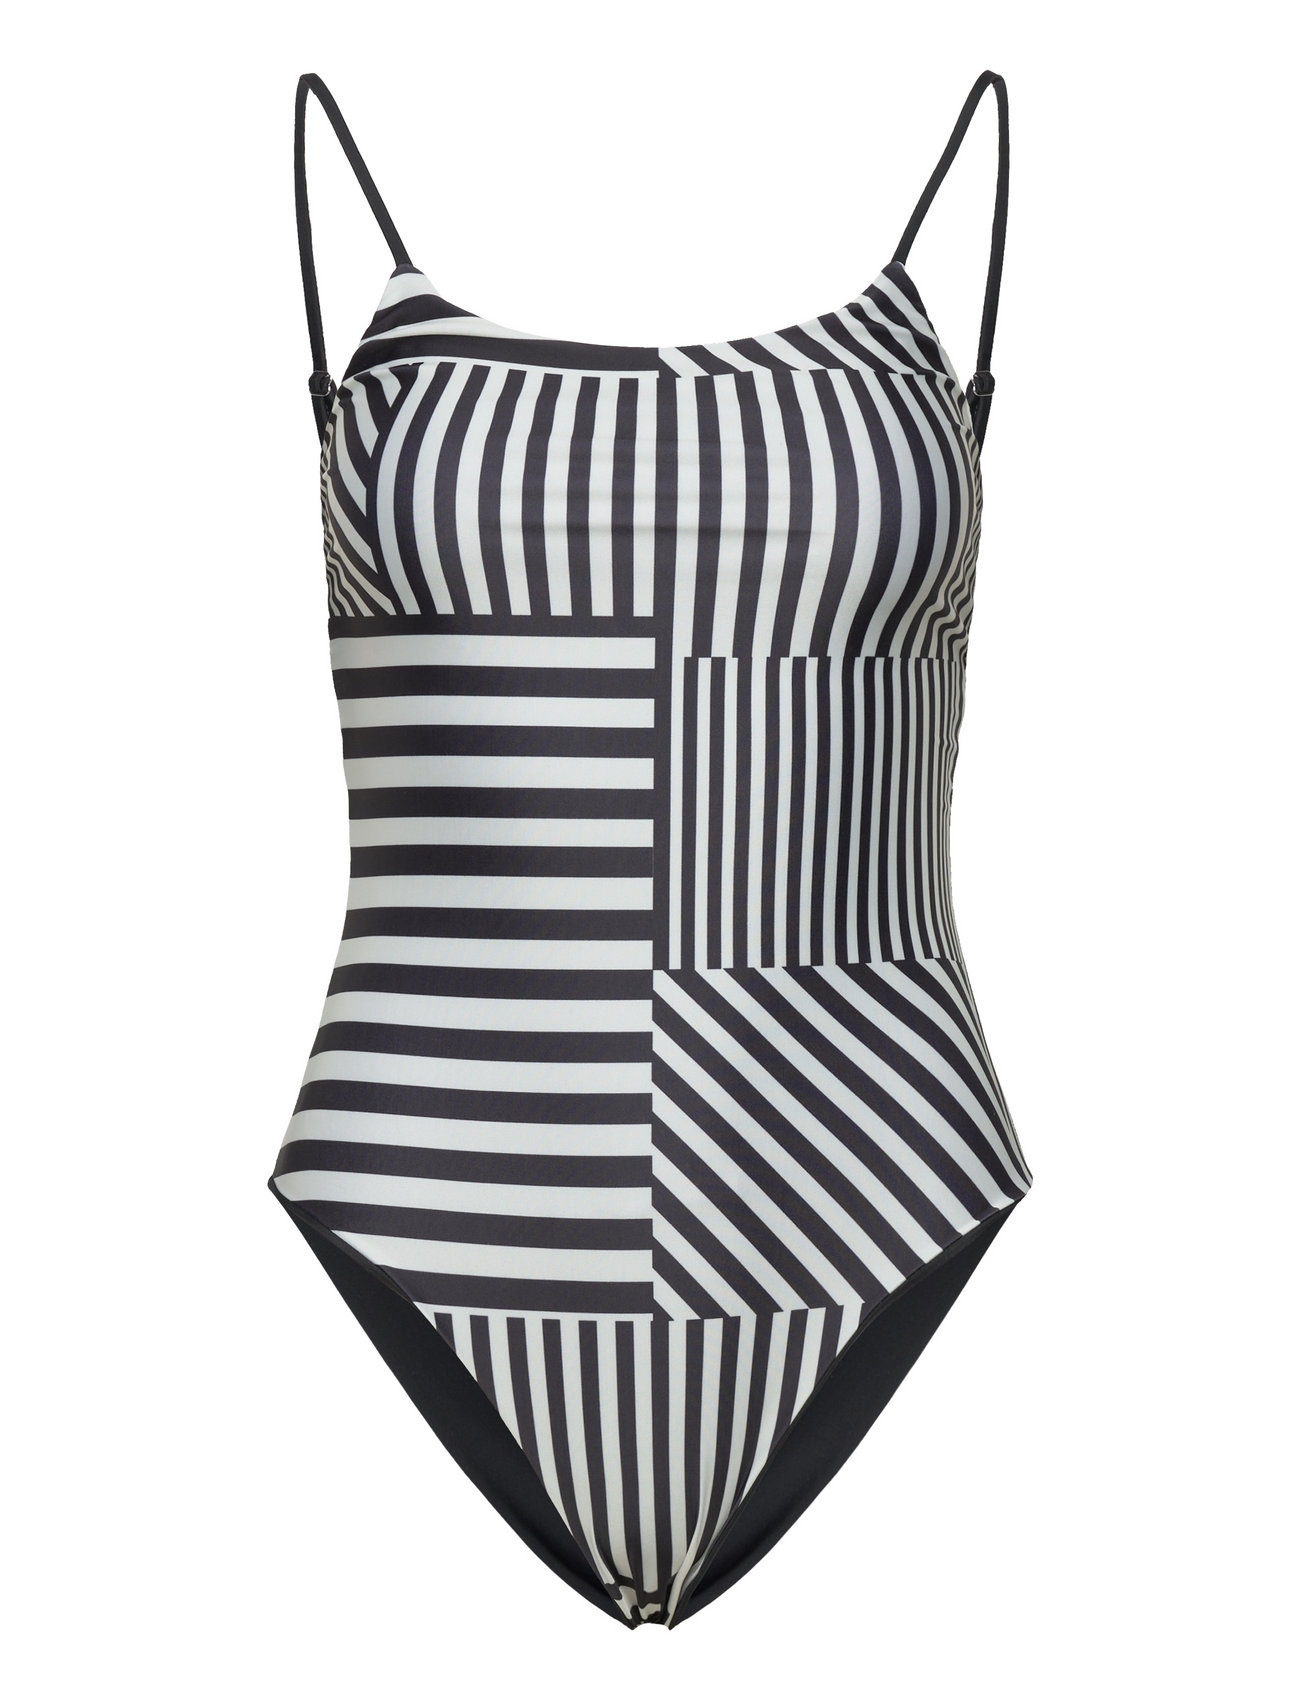 Mads Cceco Swim Suit Badedragter - Boozt.com